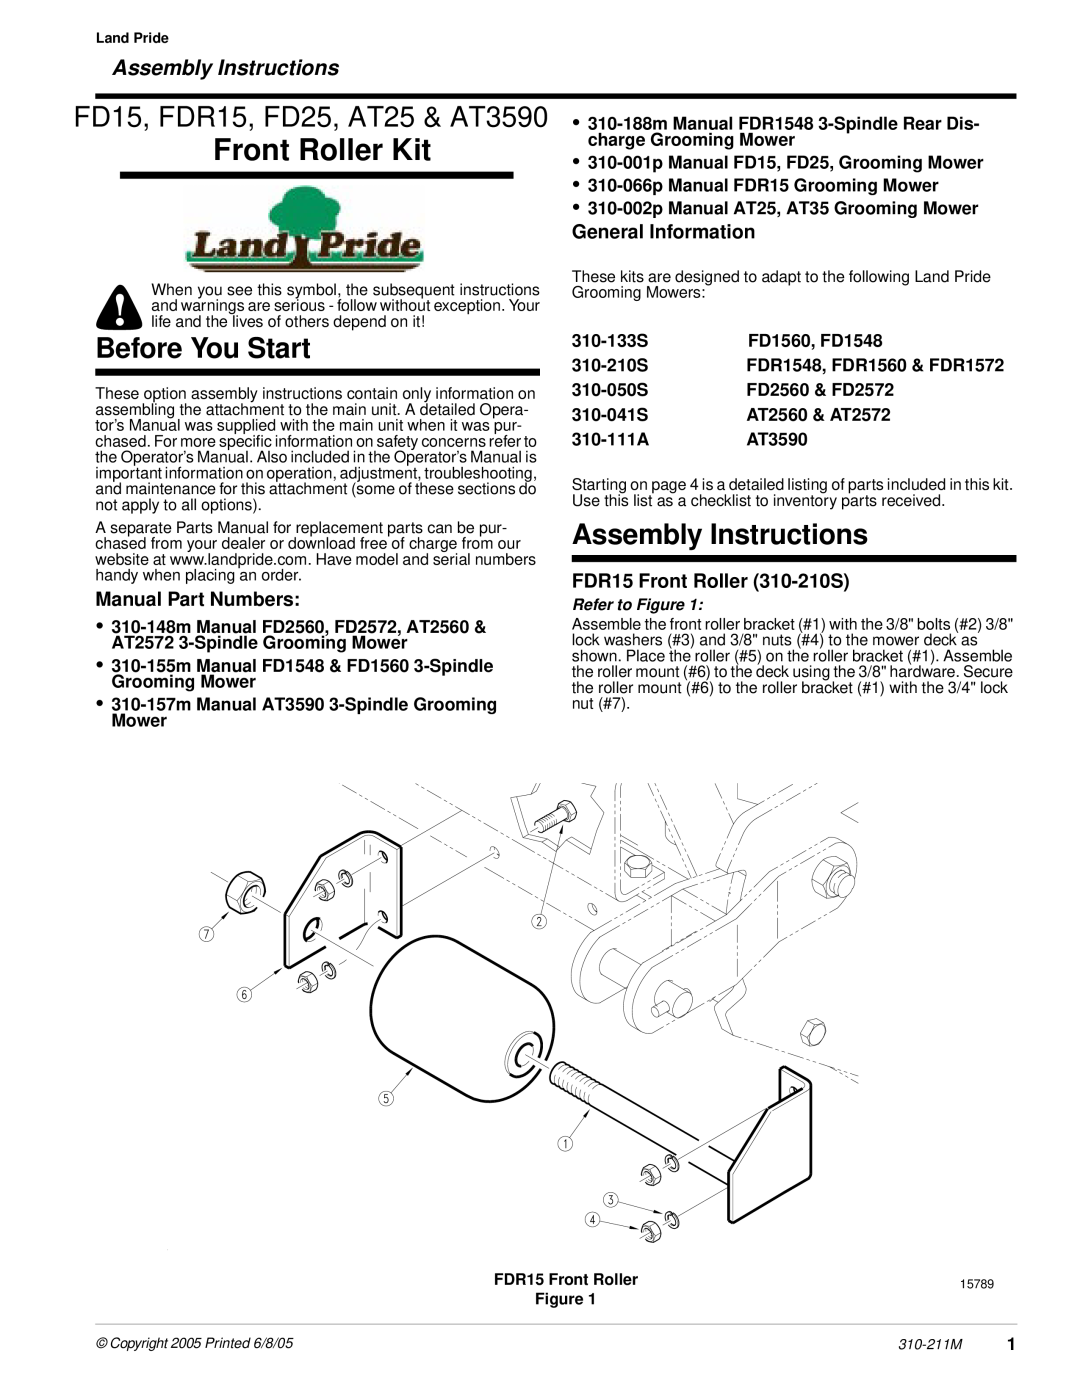 Land Pride FDR15 manual Table of Contents, Rear Discharge Grooming Mowers, Operator’st ’s Manuall, 310-188M 